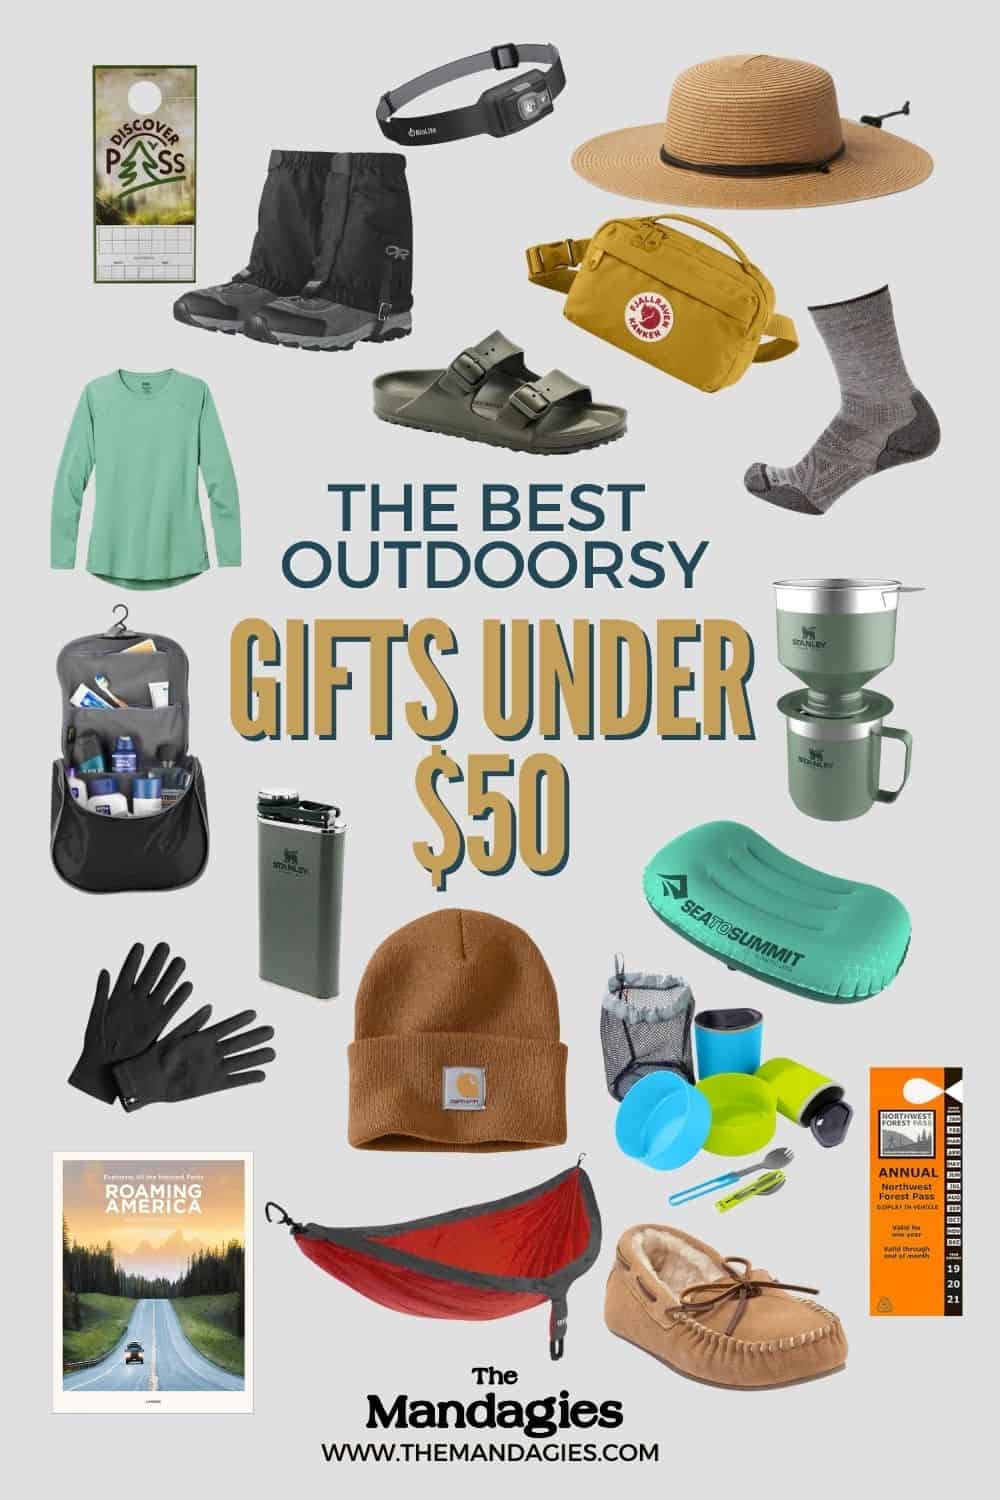 Our Top Gifts Under $50 — Naturally Outdoors